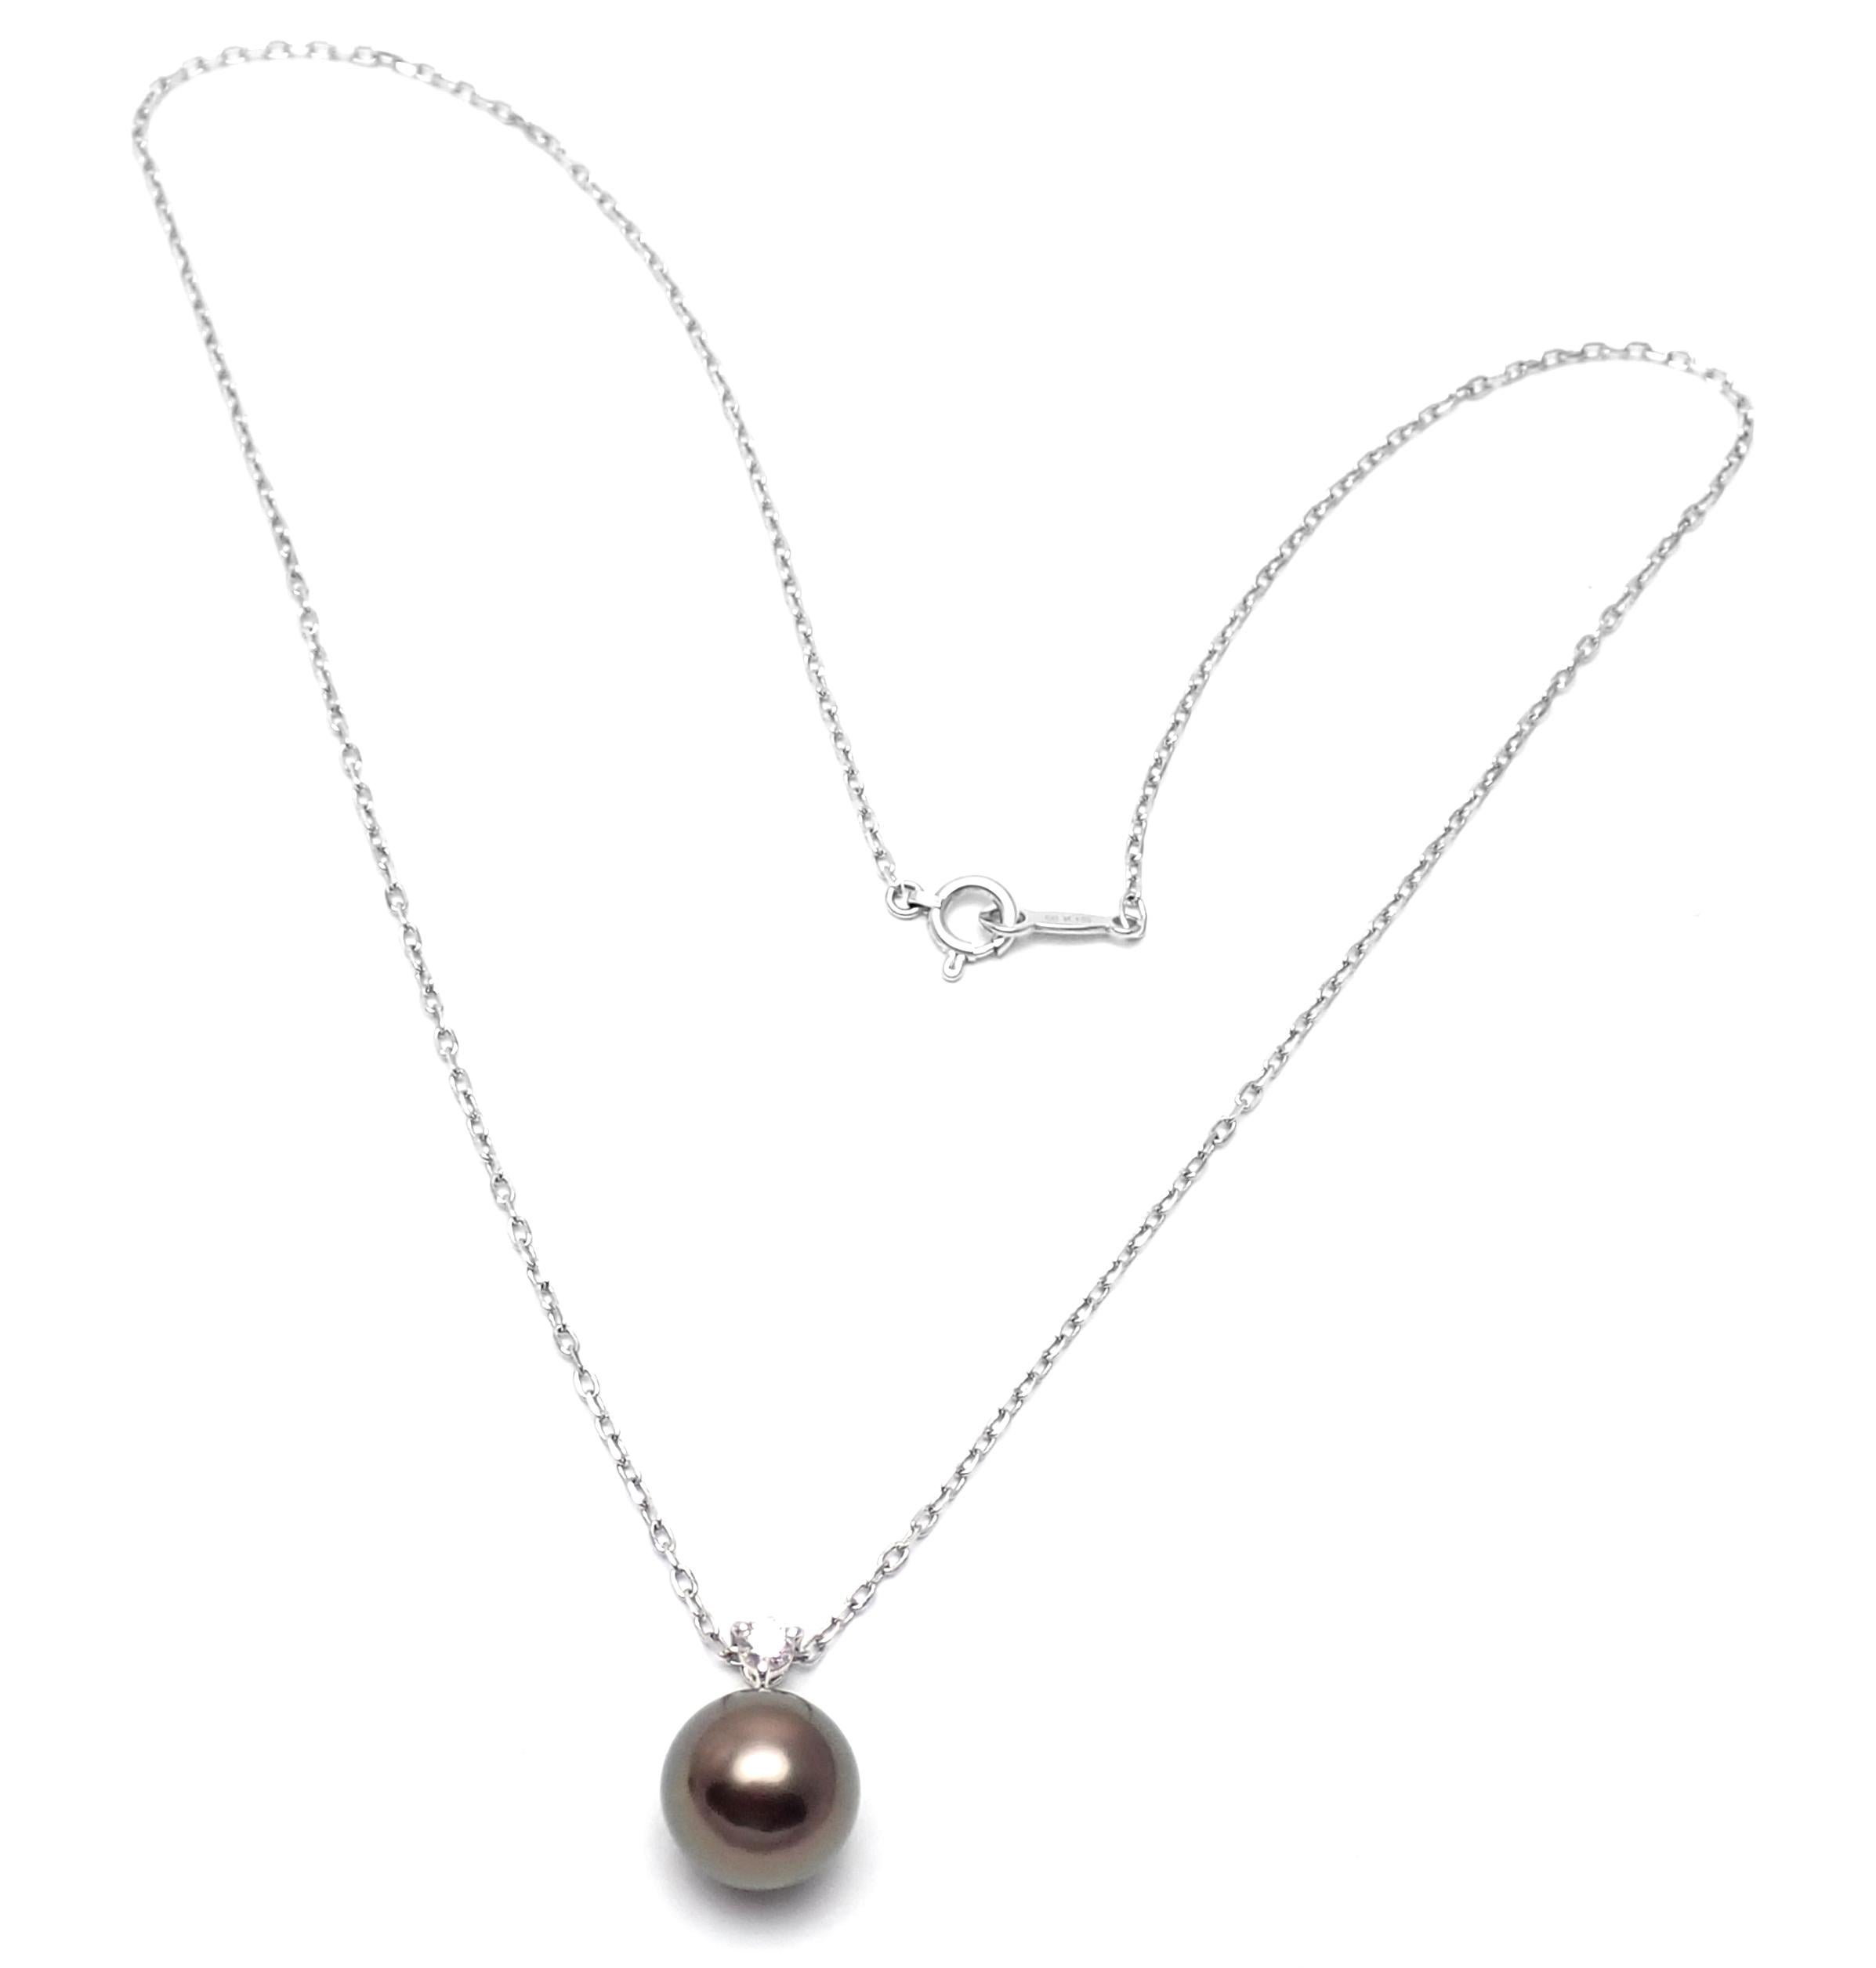 18k White Gold Diamond Tahitian Black Pearl Pendant Necklace by Mikimoto. 
With 1 round brilliant cut diamonds VS1 clarity, E color total weight approximately .10ct
1 Tahitian black pearl 10mm
Details:
Necklace length: 15